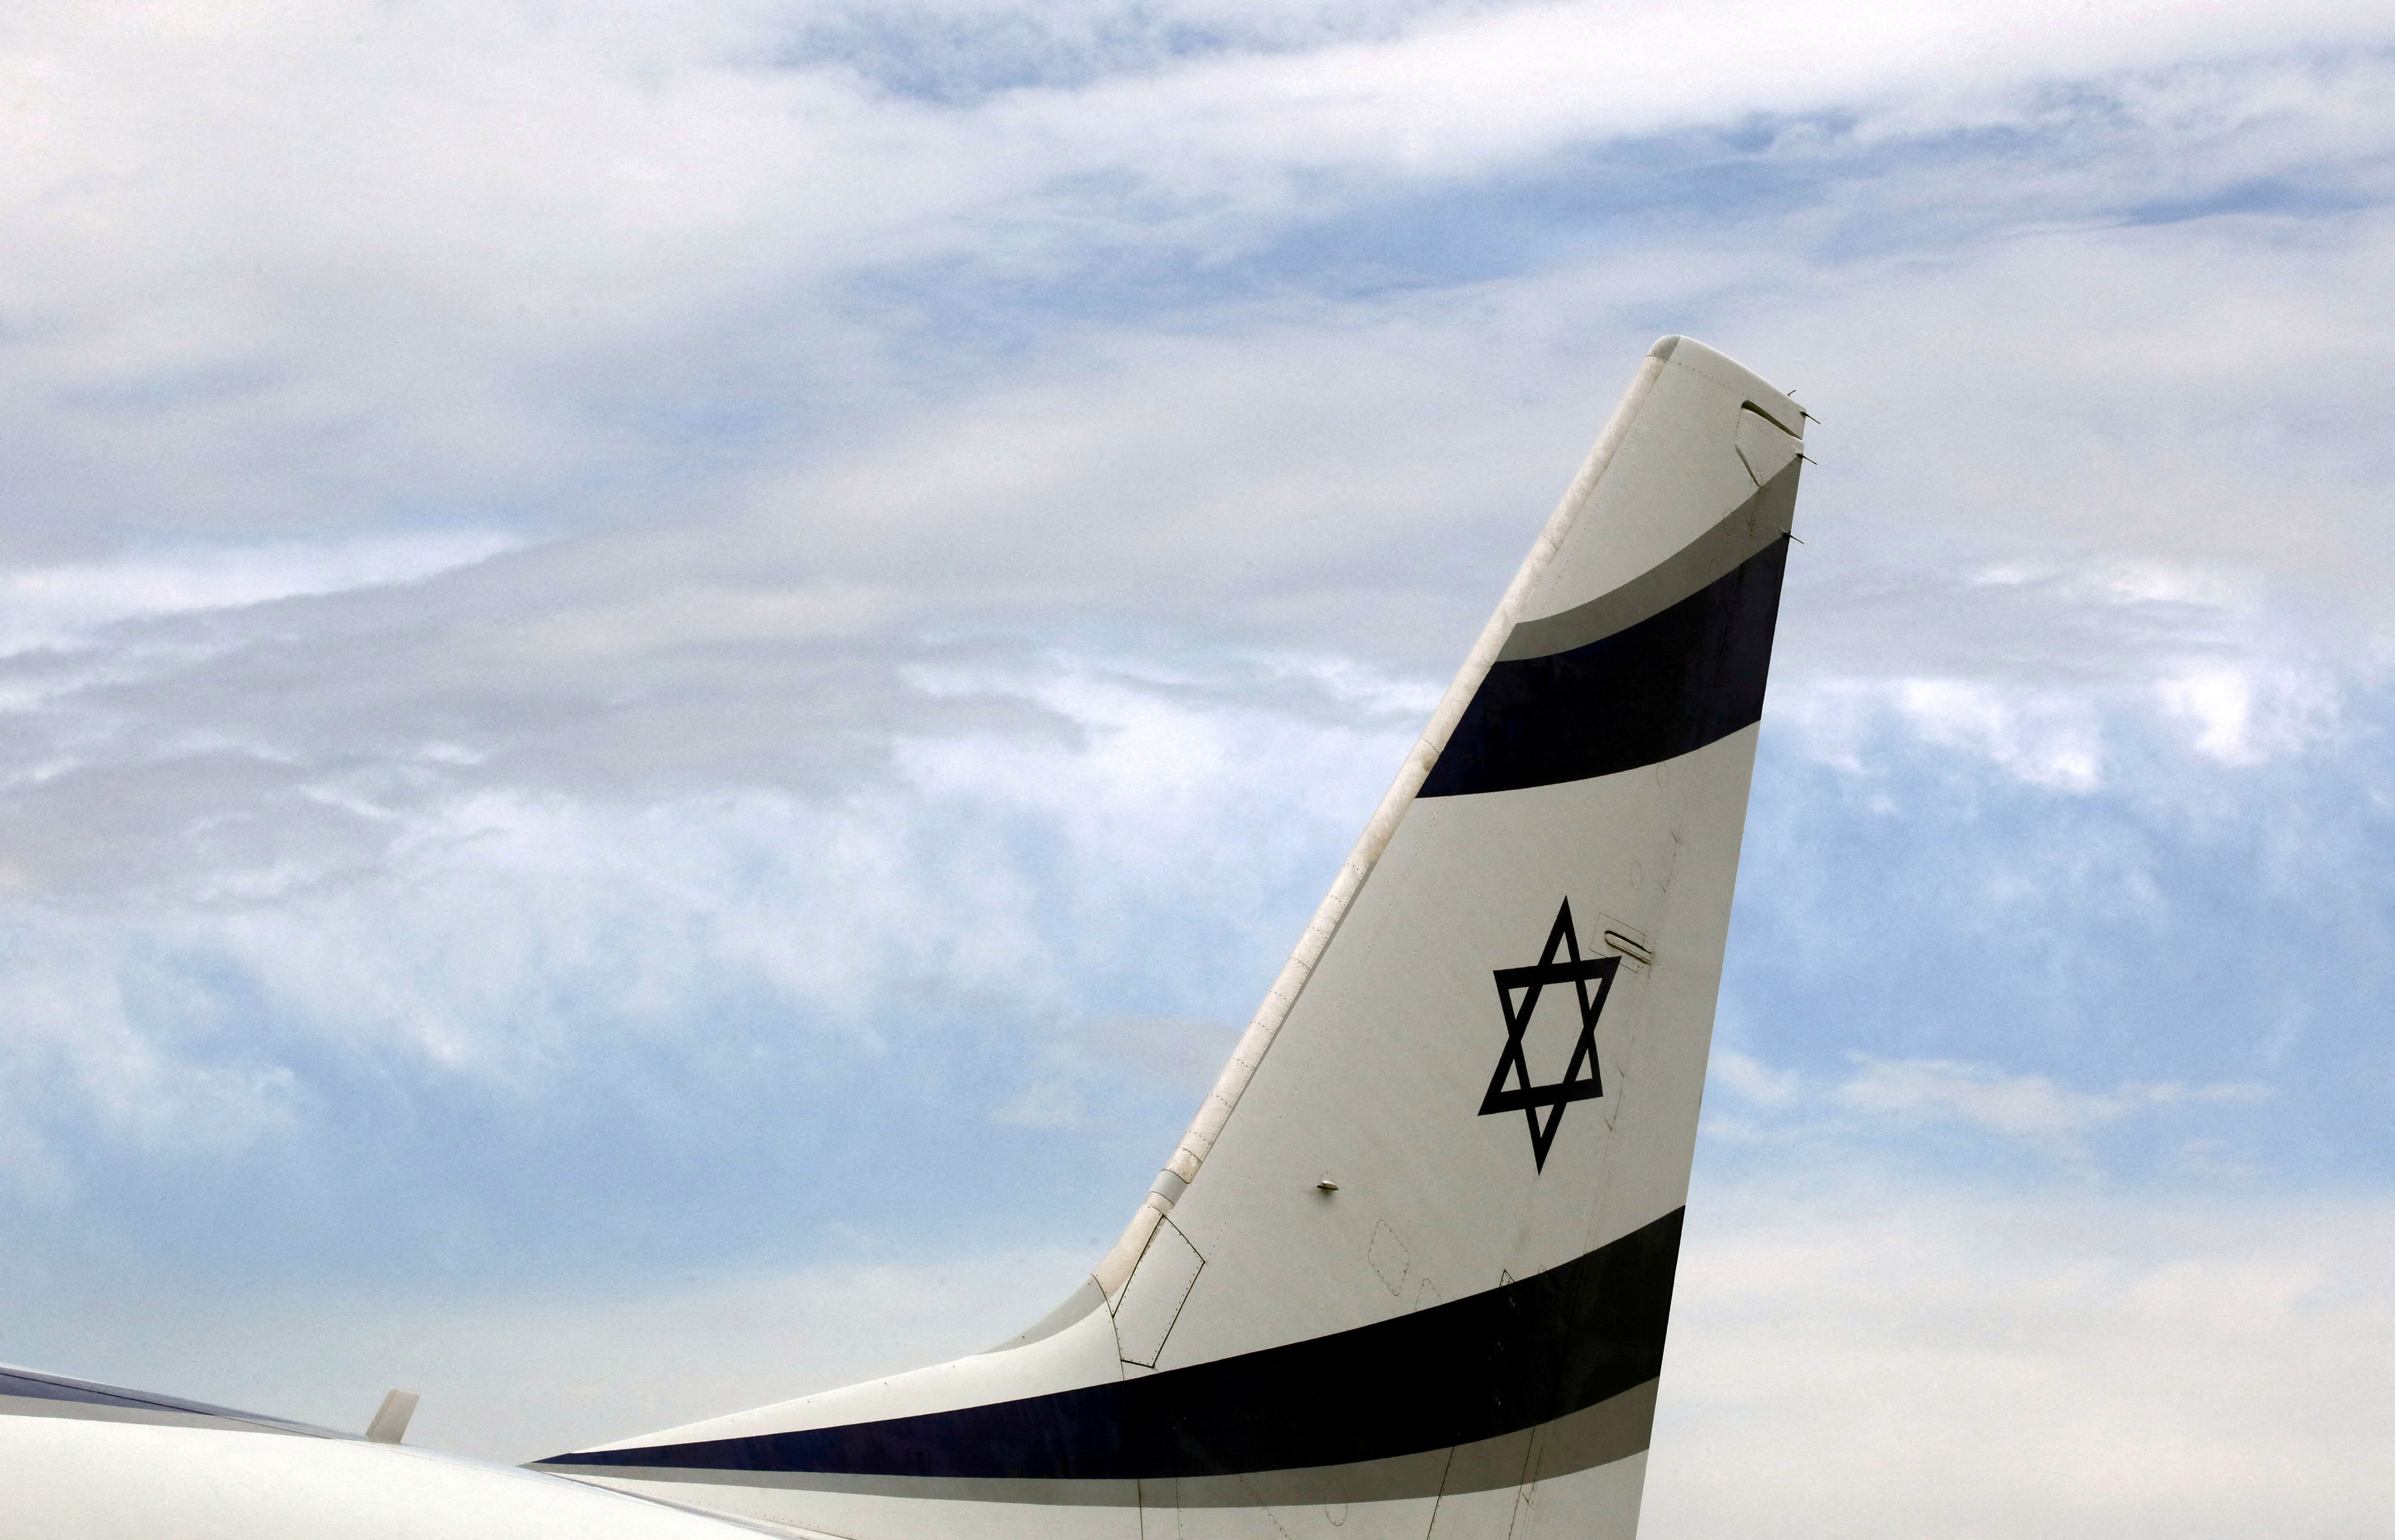 FILE PHOTO: An Israel El Al airlines plane is seen after landing at Nice international airport, France